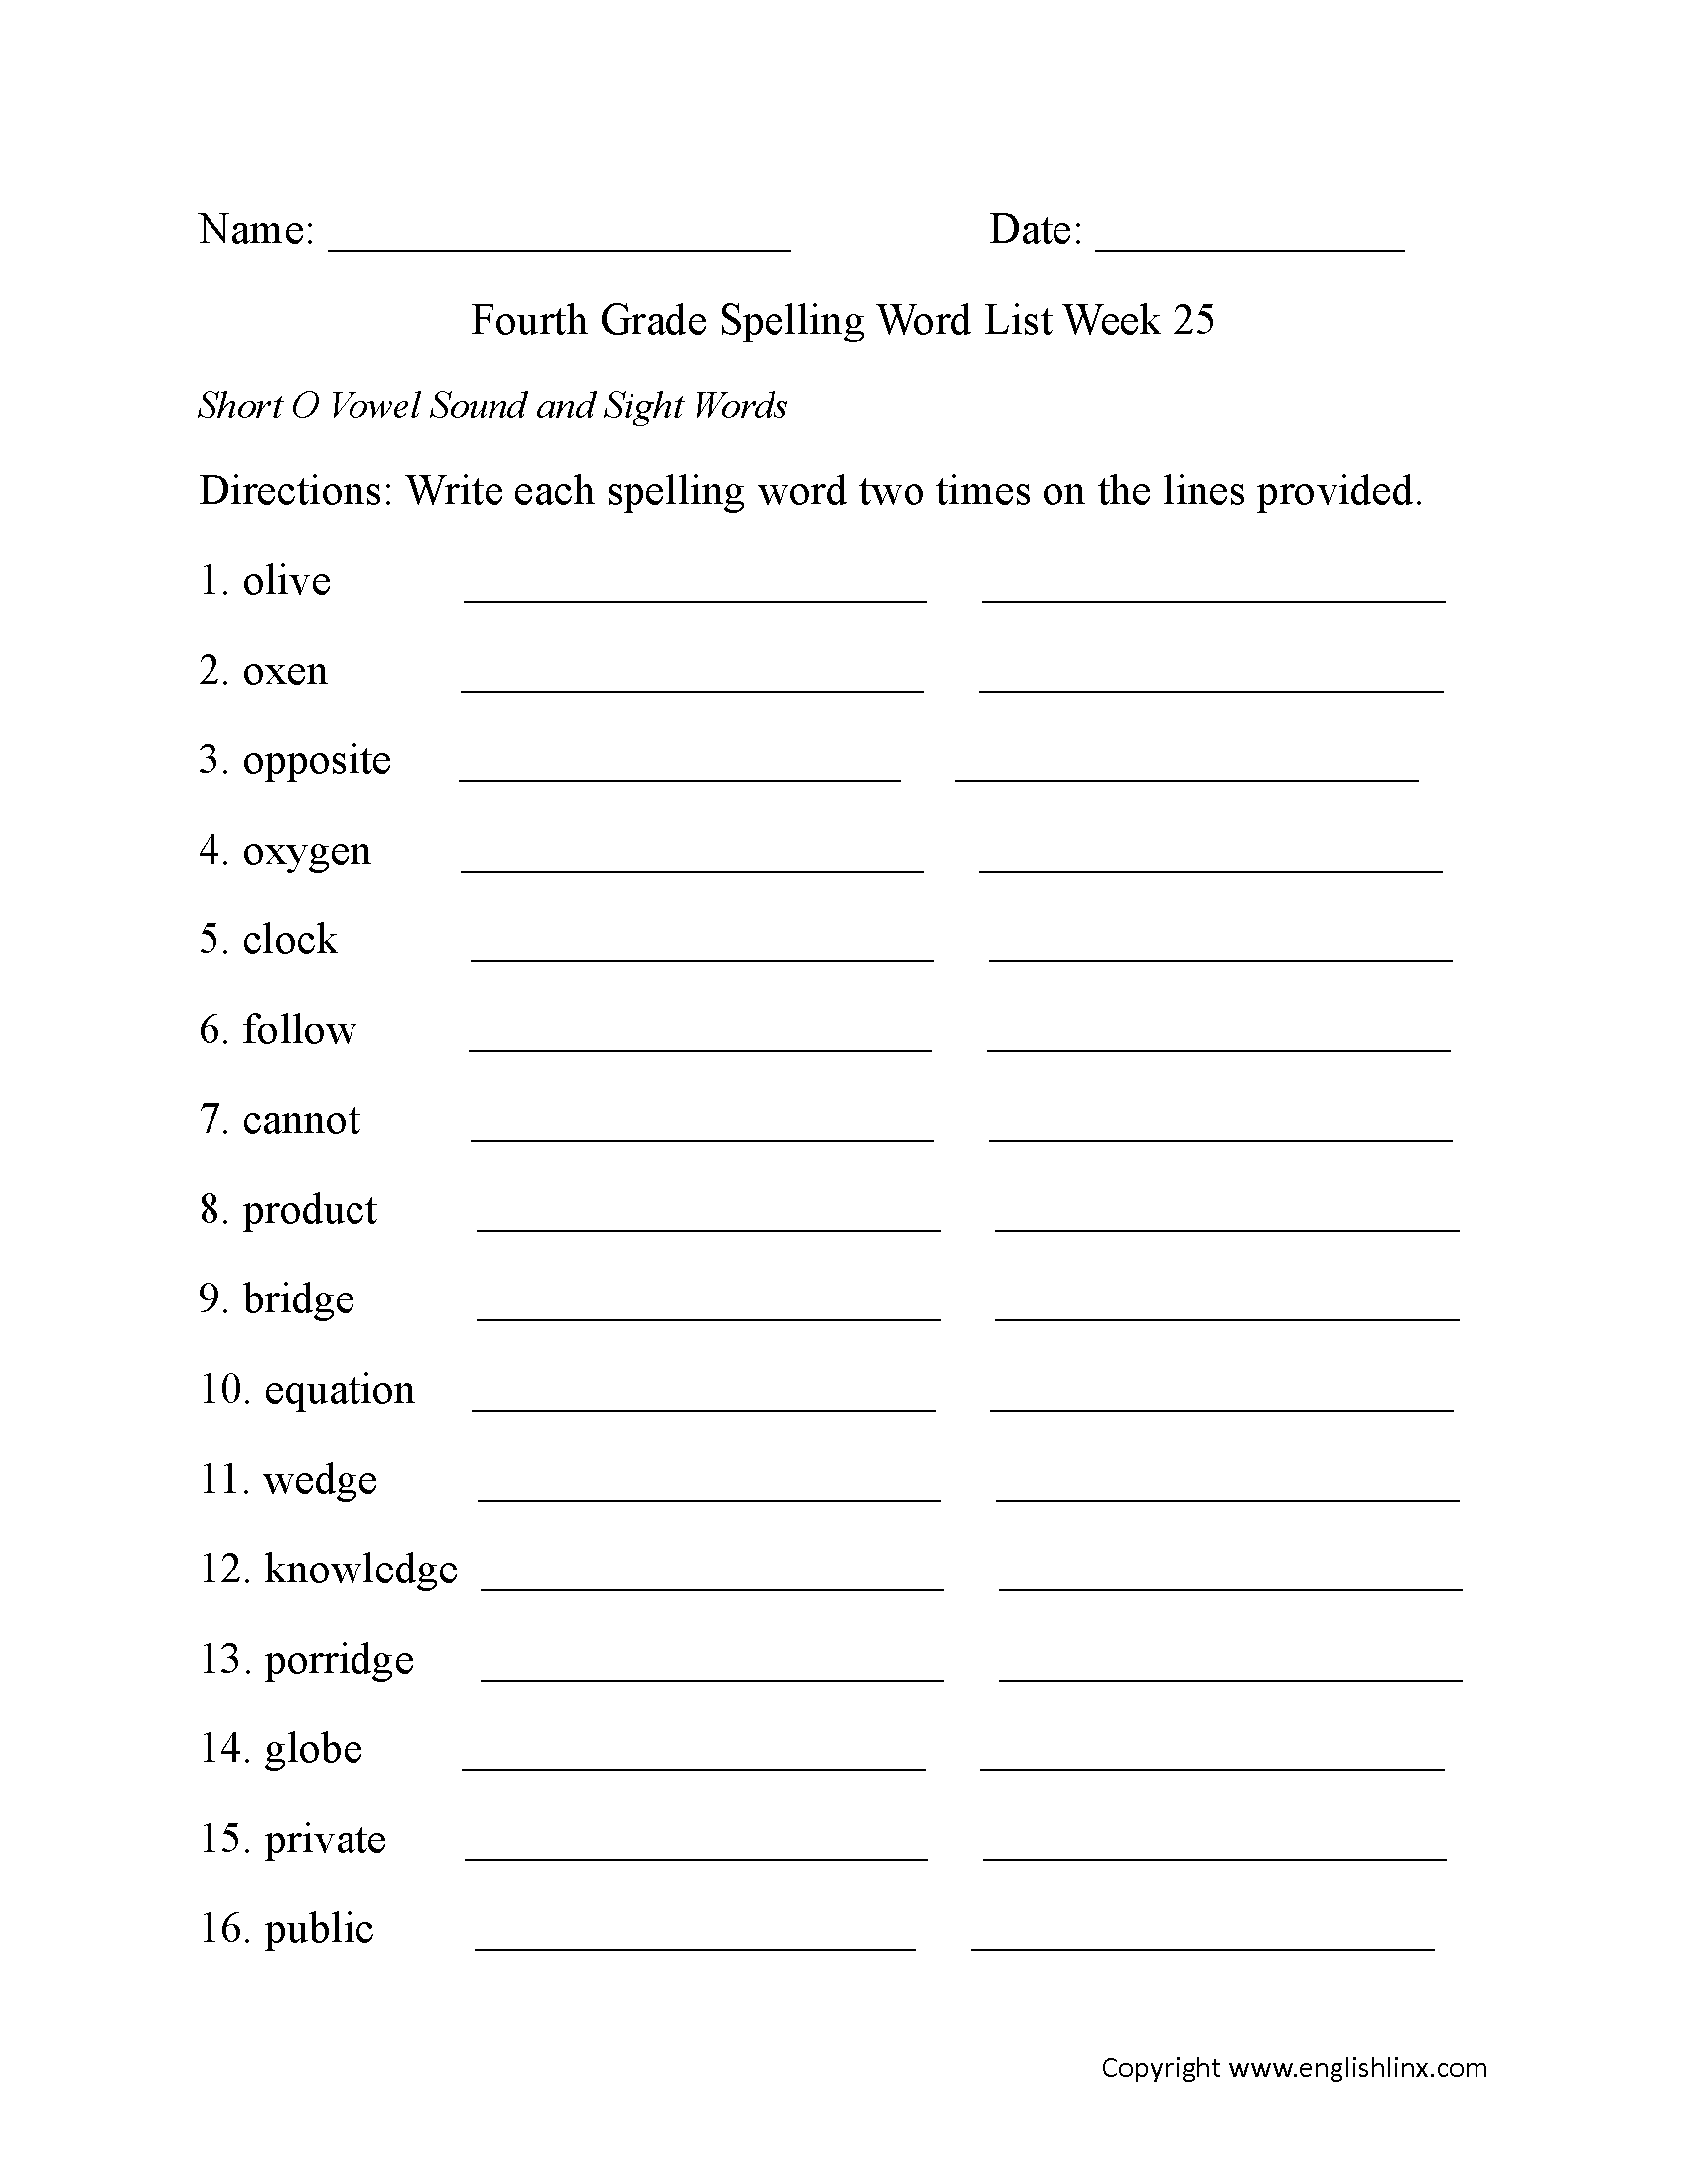 Week 25 Short O Vowel and Sight Words Fourth Grade Spelling Words Worksheets